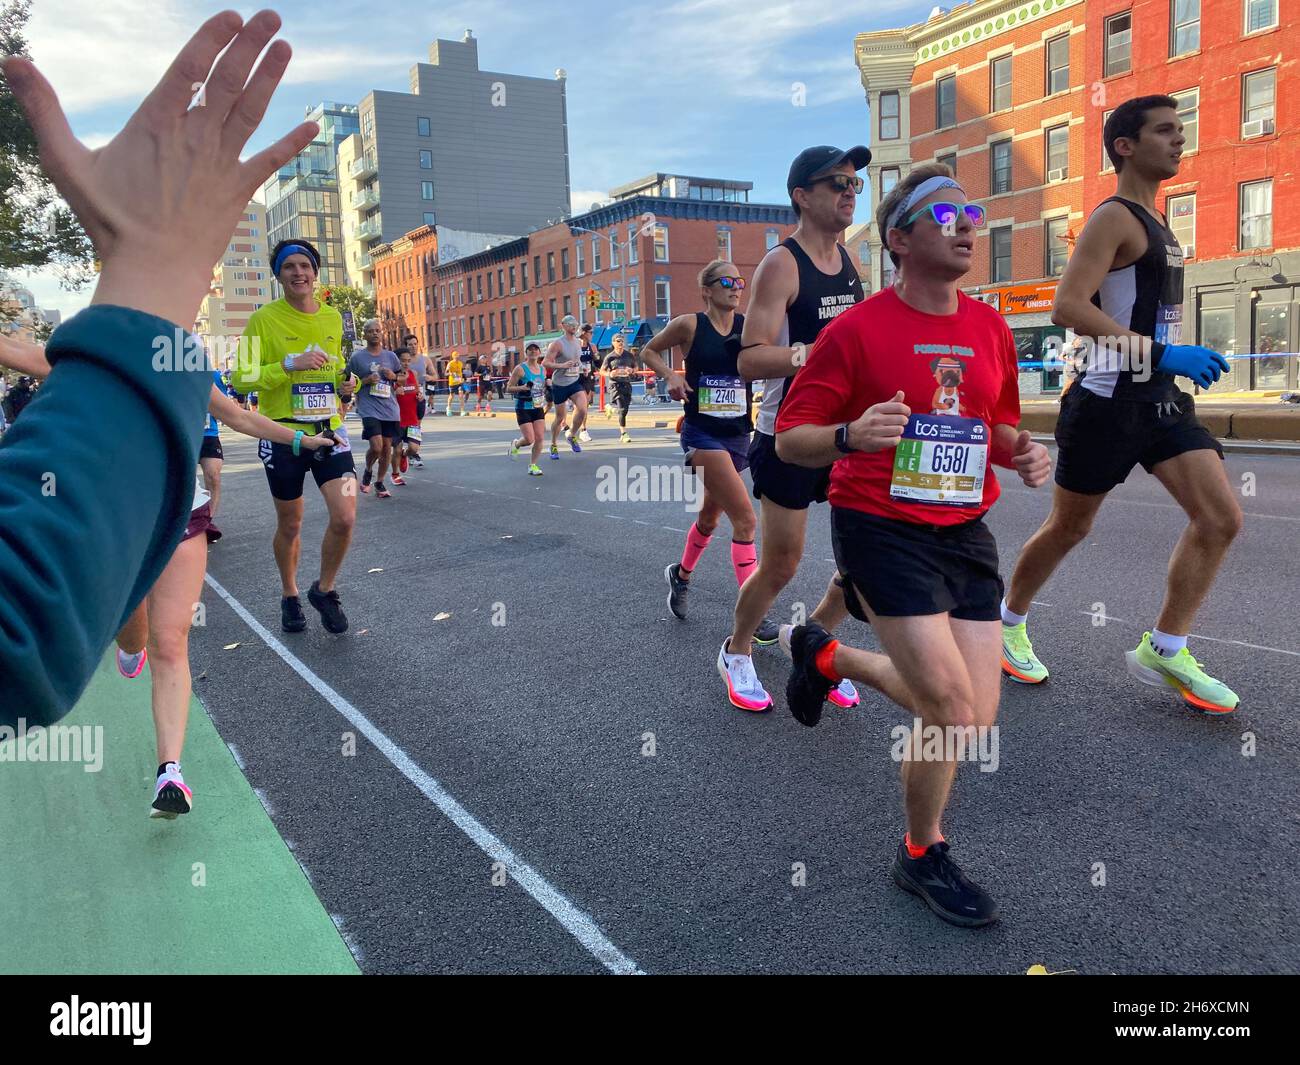 Spectators give Marathoners 'High Fives' as encouragement as they run up 4th Avenue through the Park Slope neighborhood of Brooklyn during the 2021 NYC Marathon. Stock Photo